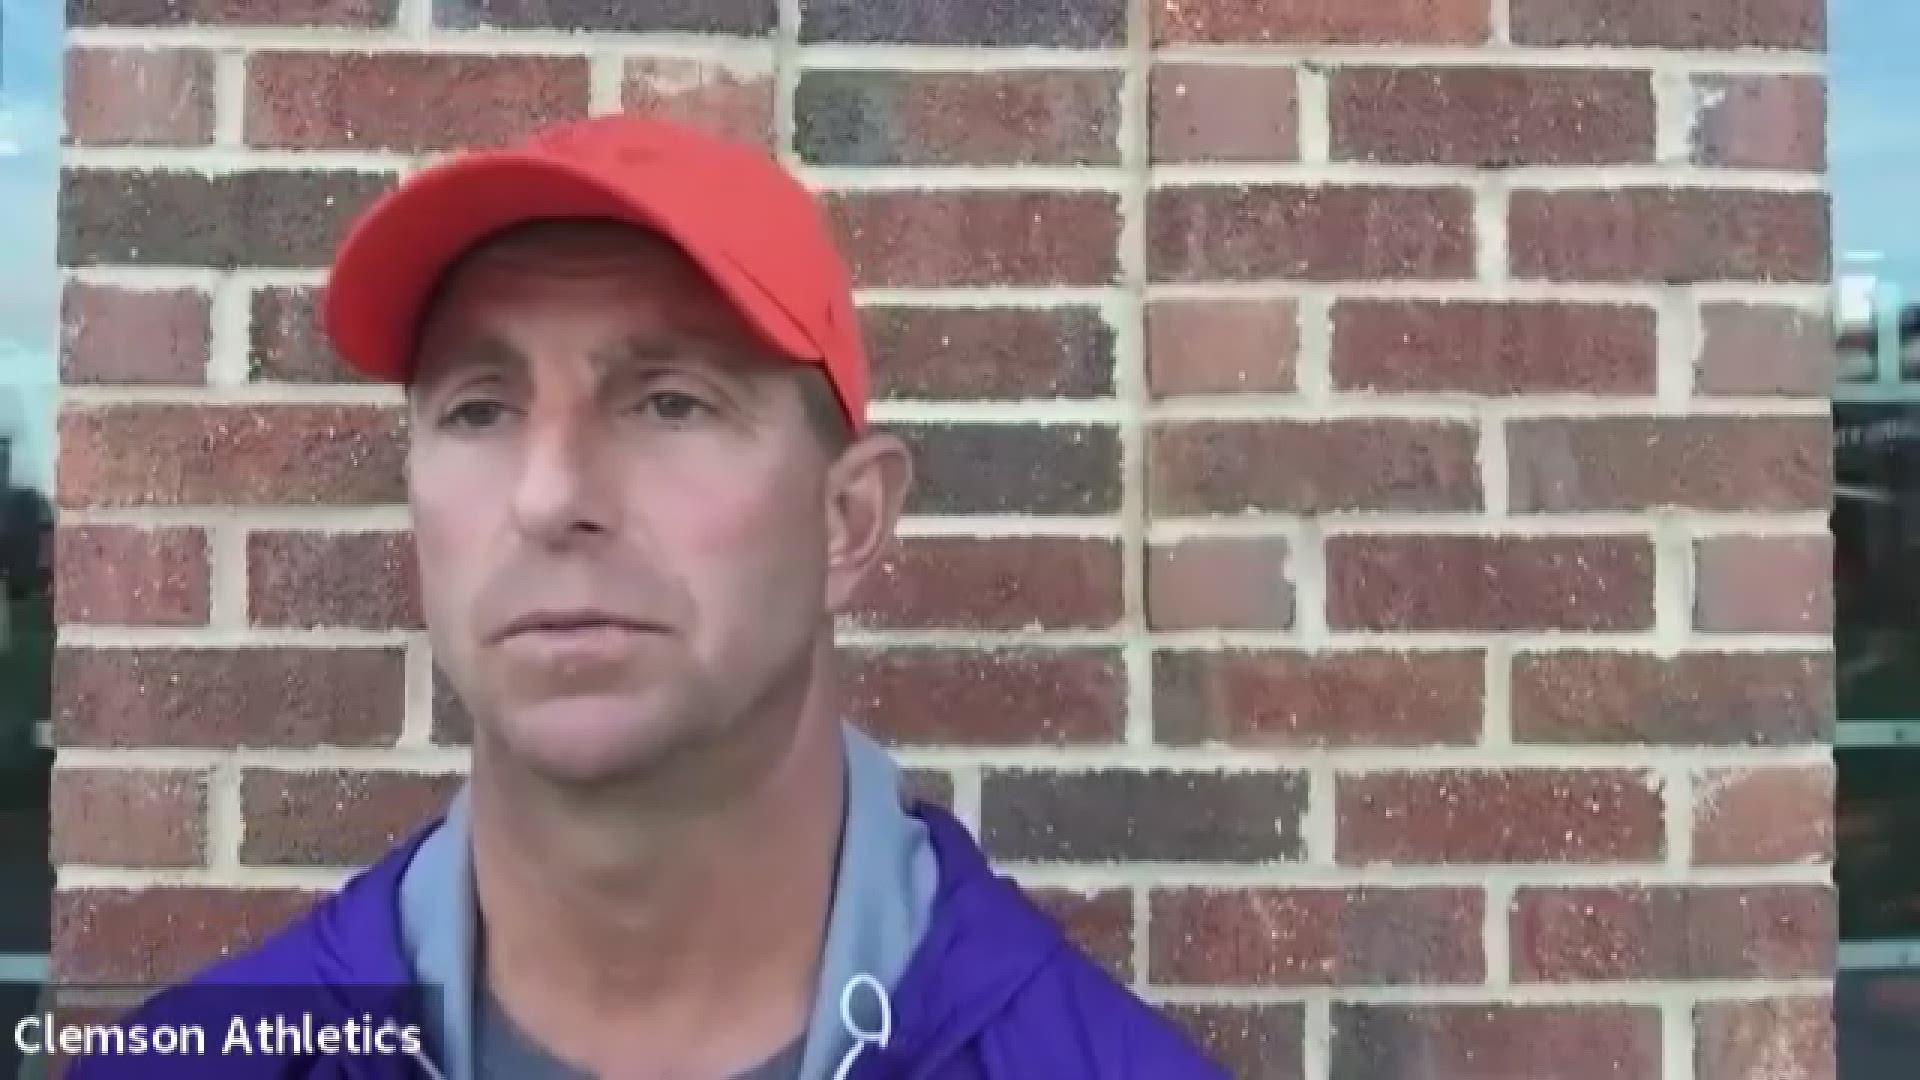 Clemson head football coach Dabo Swinney reacts to the sexual assault lawsuits filed against his former player and current Houston Texans qb Deshaun Watson